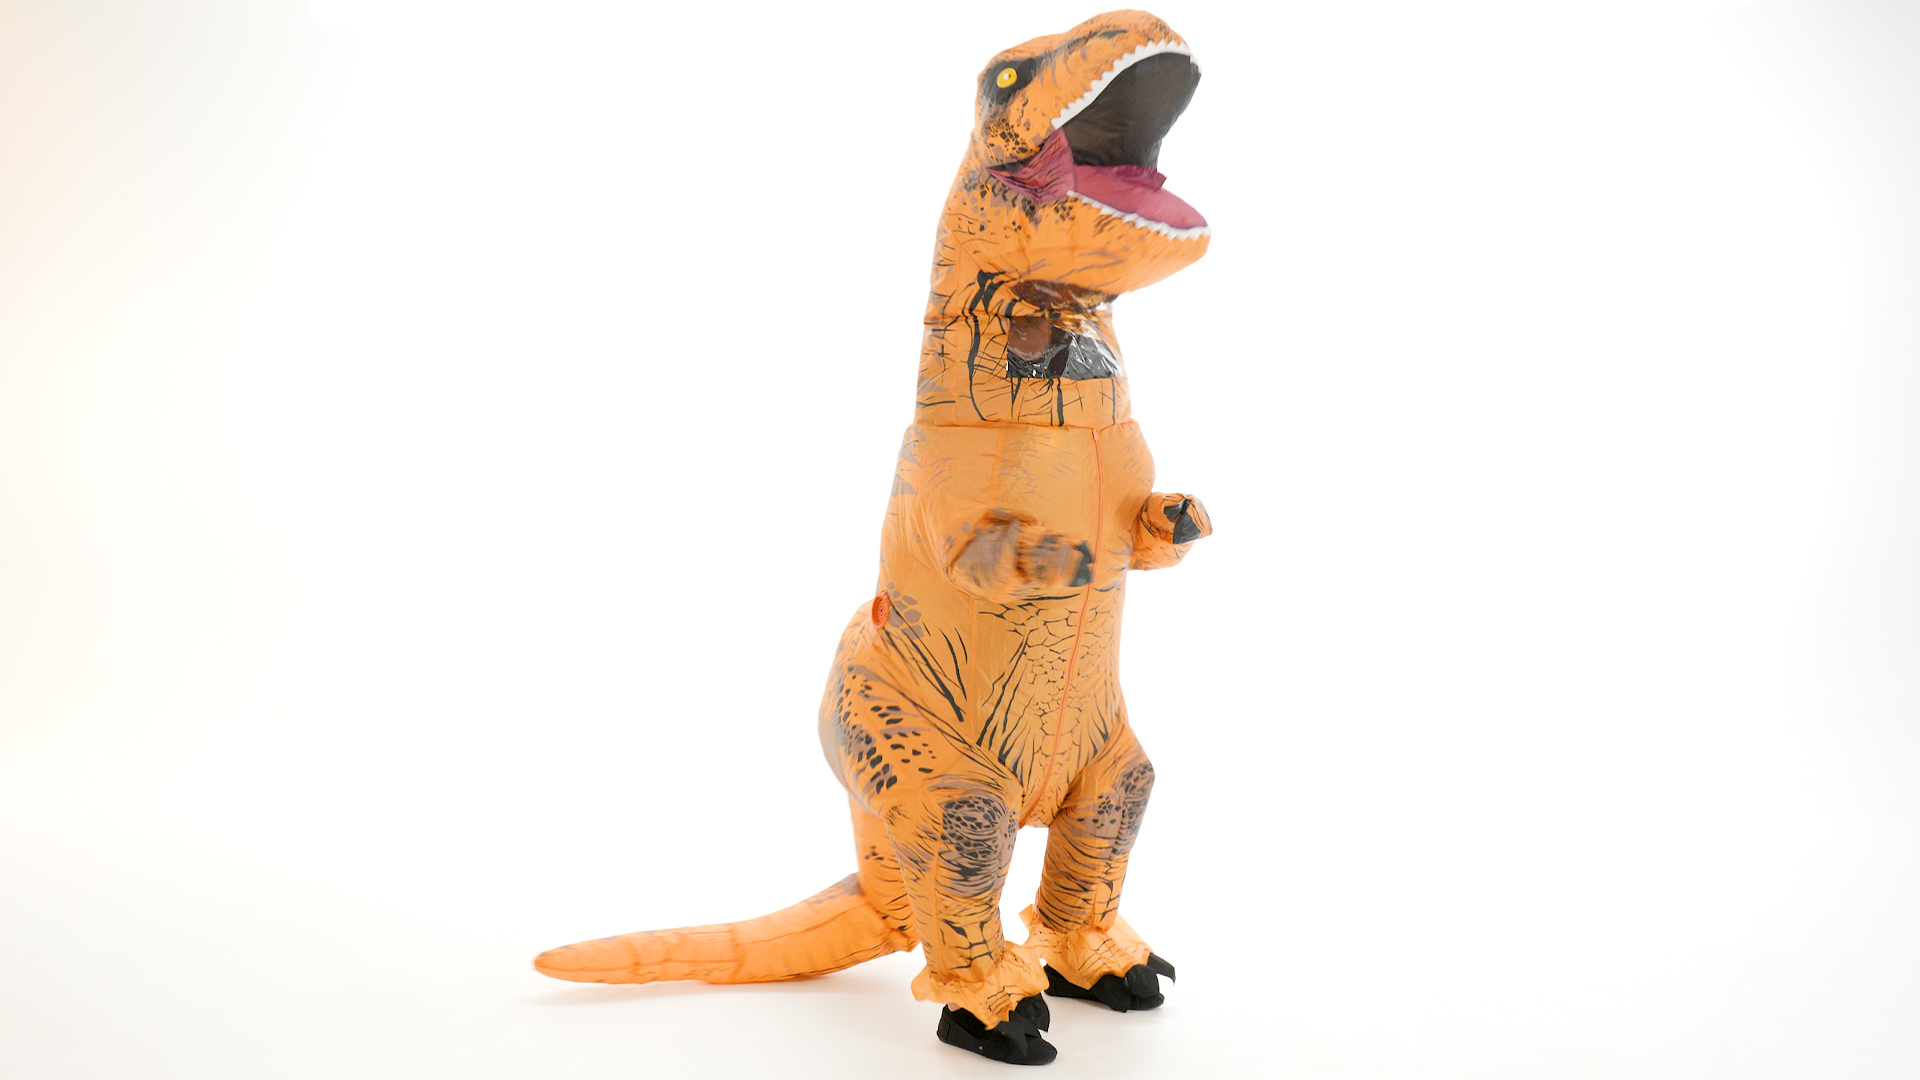 This Adult Inflatable Jurassic World T-Rex Costume will have you ready to do it dino-style. It's the closest you'll ever come to being a real dinosaur.